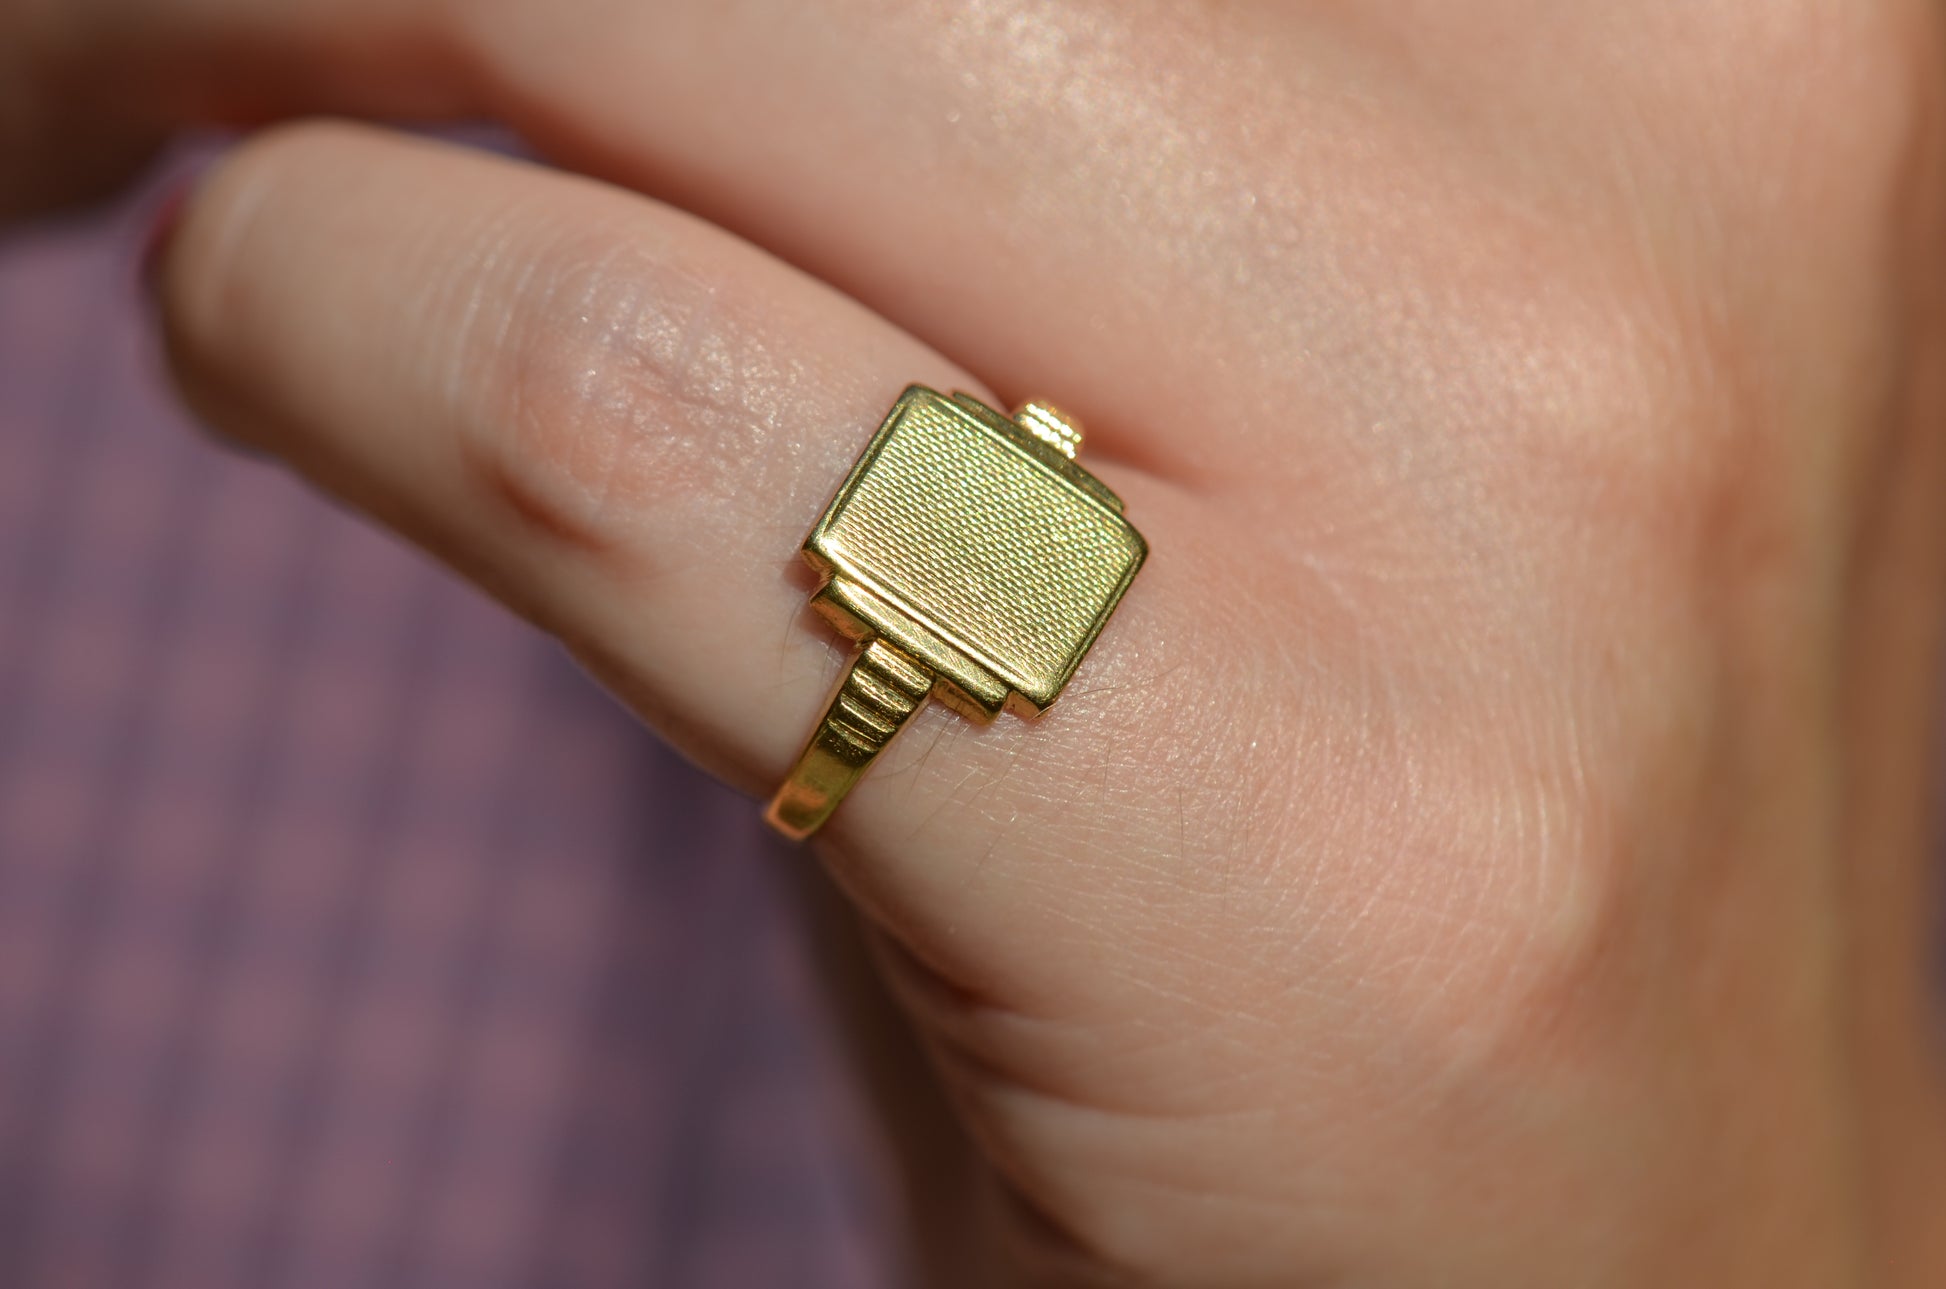 A closely cropped view of the ring on a Caucasian model's left pinky finger.